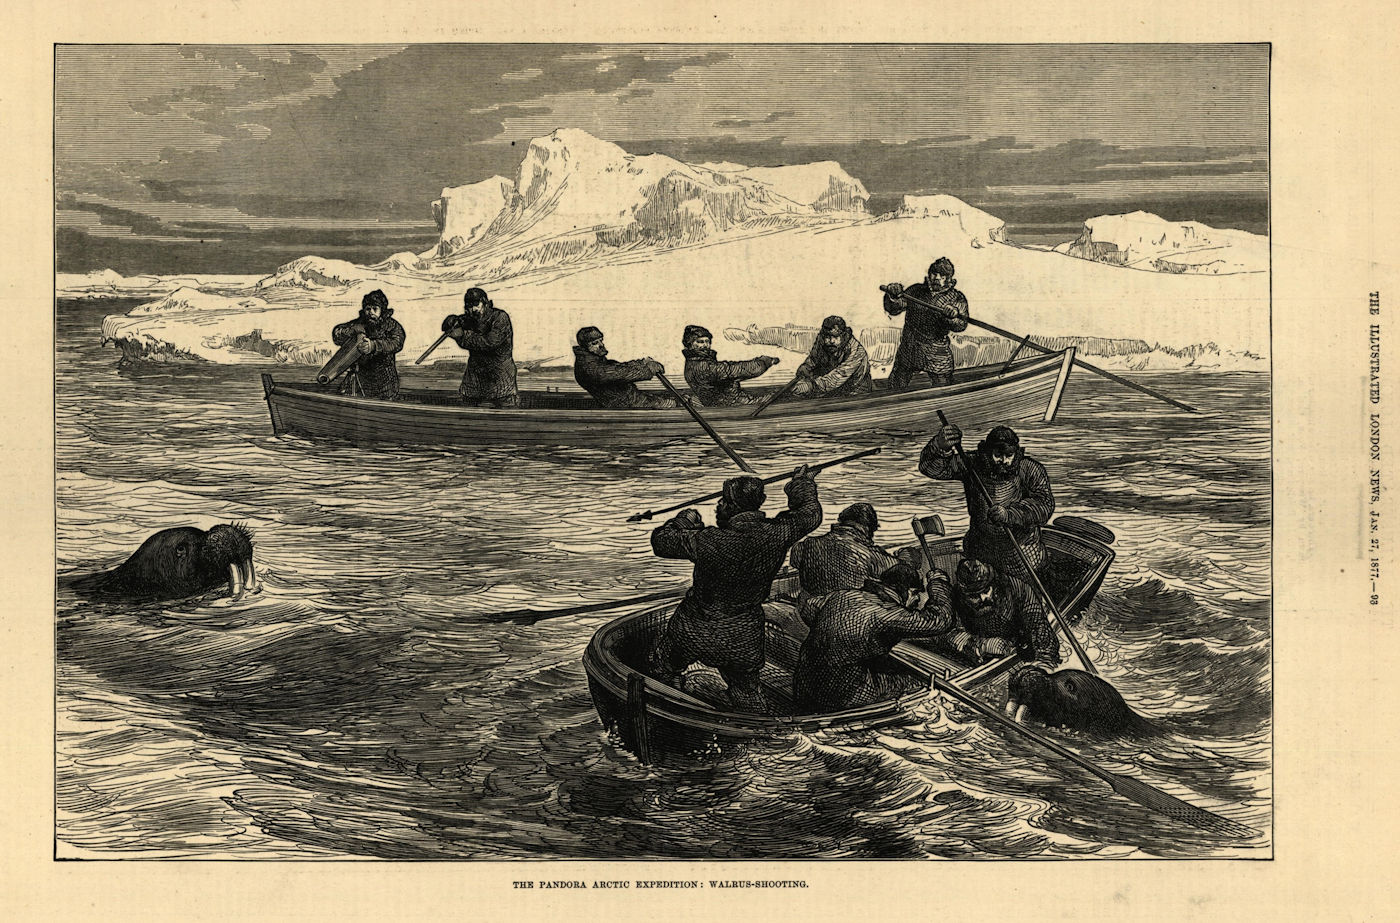 Associate Product The Pandora Arctic Expedition: Walrus-shooting. Explorers 1877 ILN full page